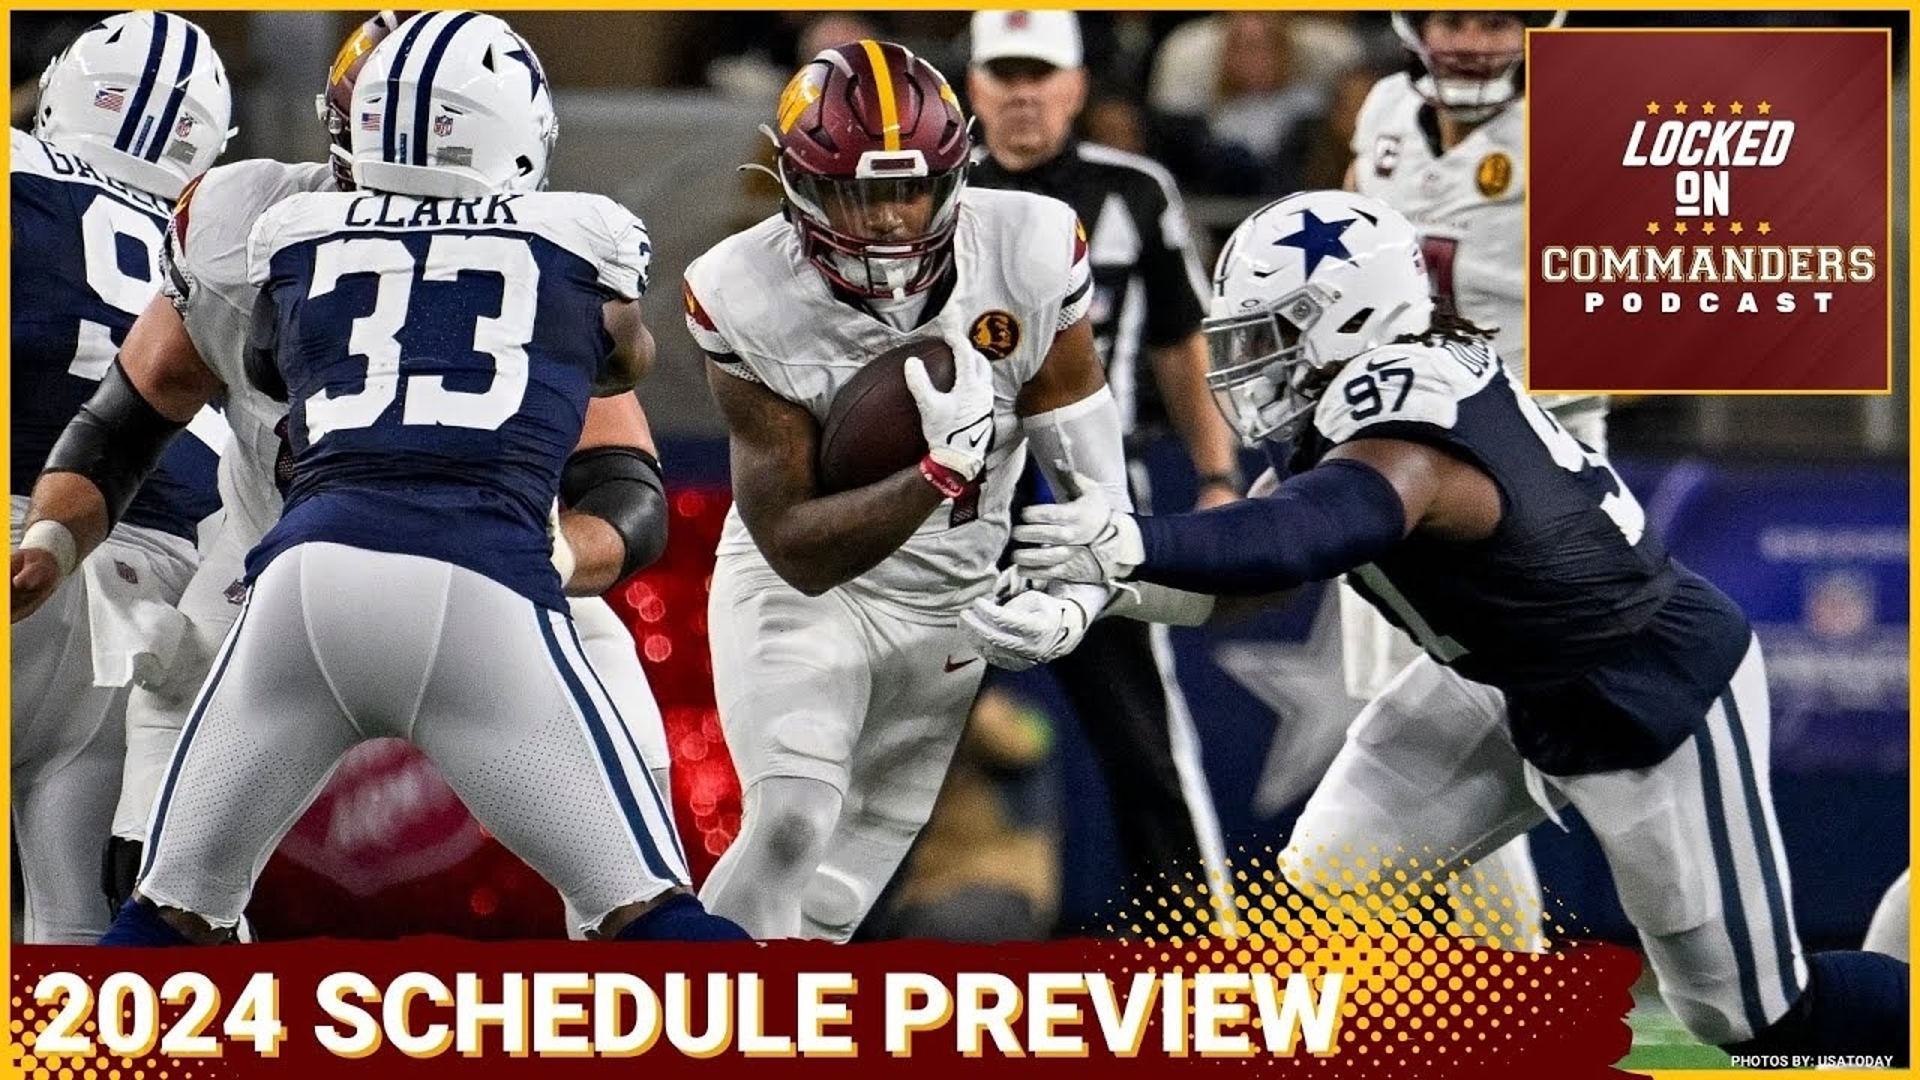 Looking at Washington Commanders schedule features that would most benefit the team in the upcoming regular season.